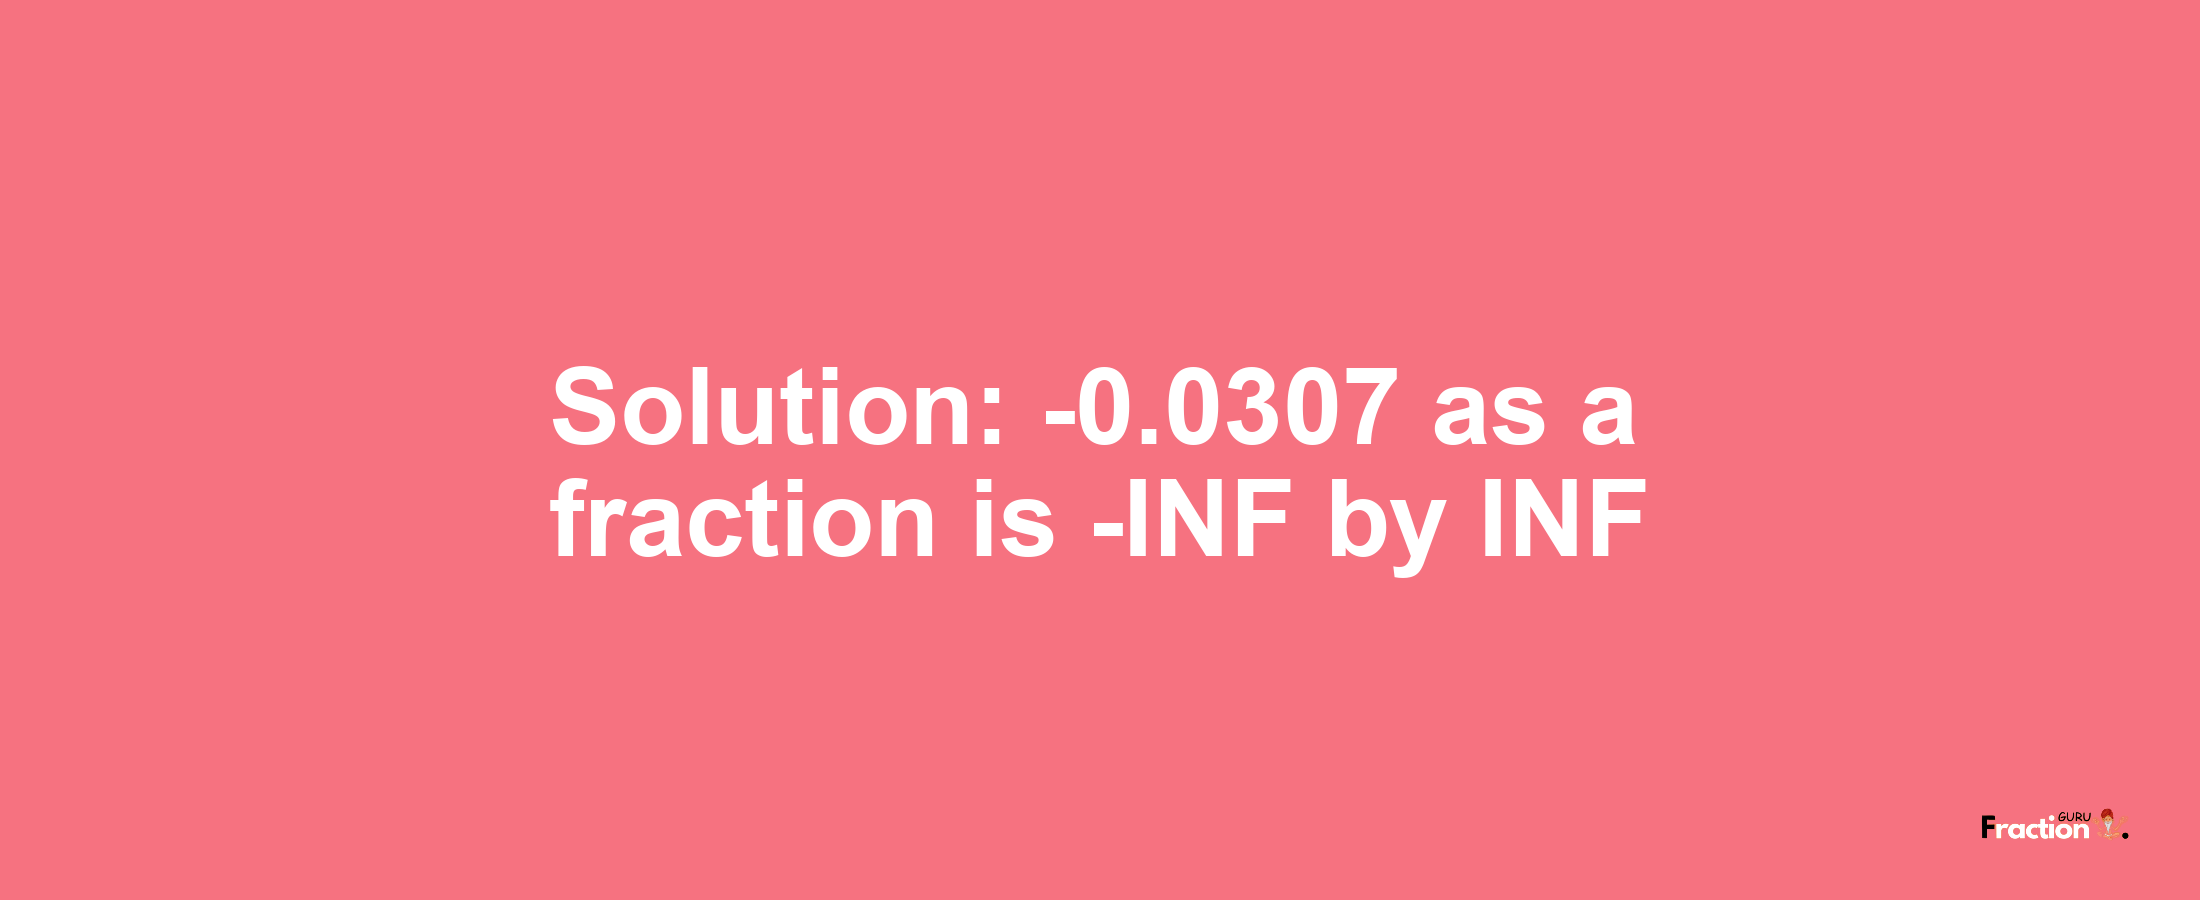 Solution:-0.0307 as a fraction is -INF/INF